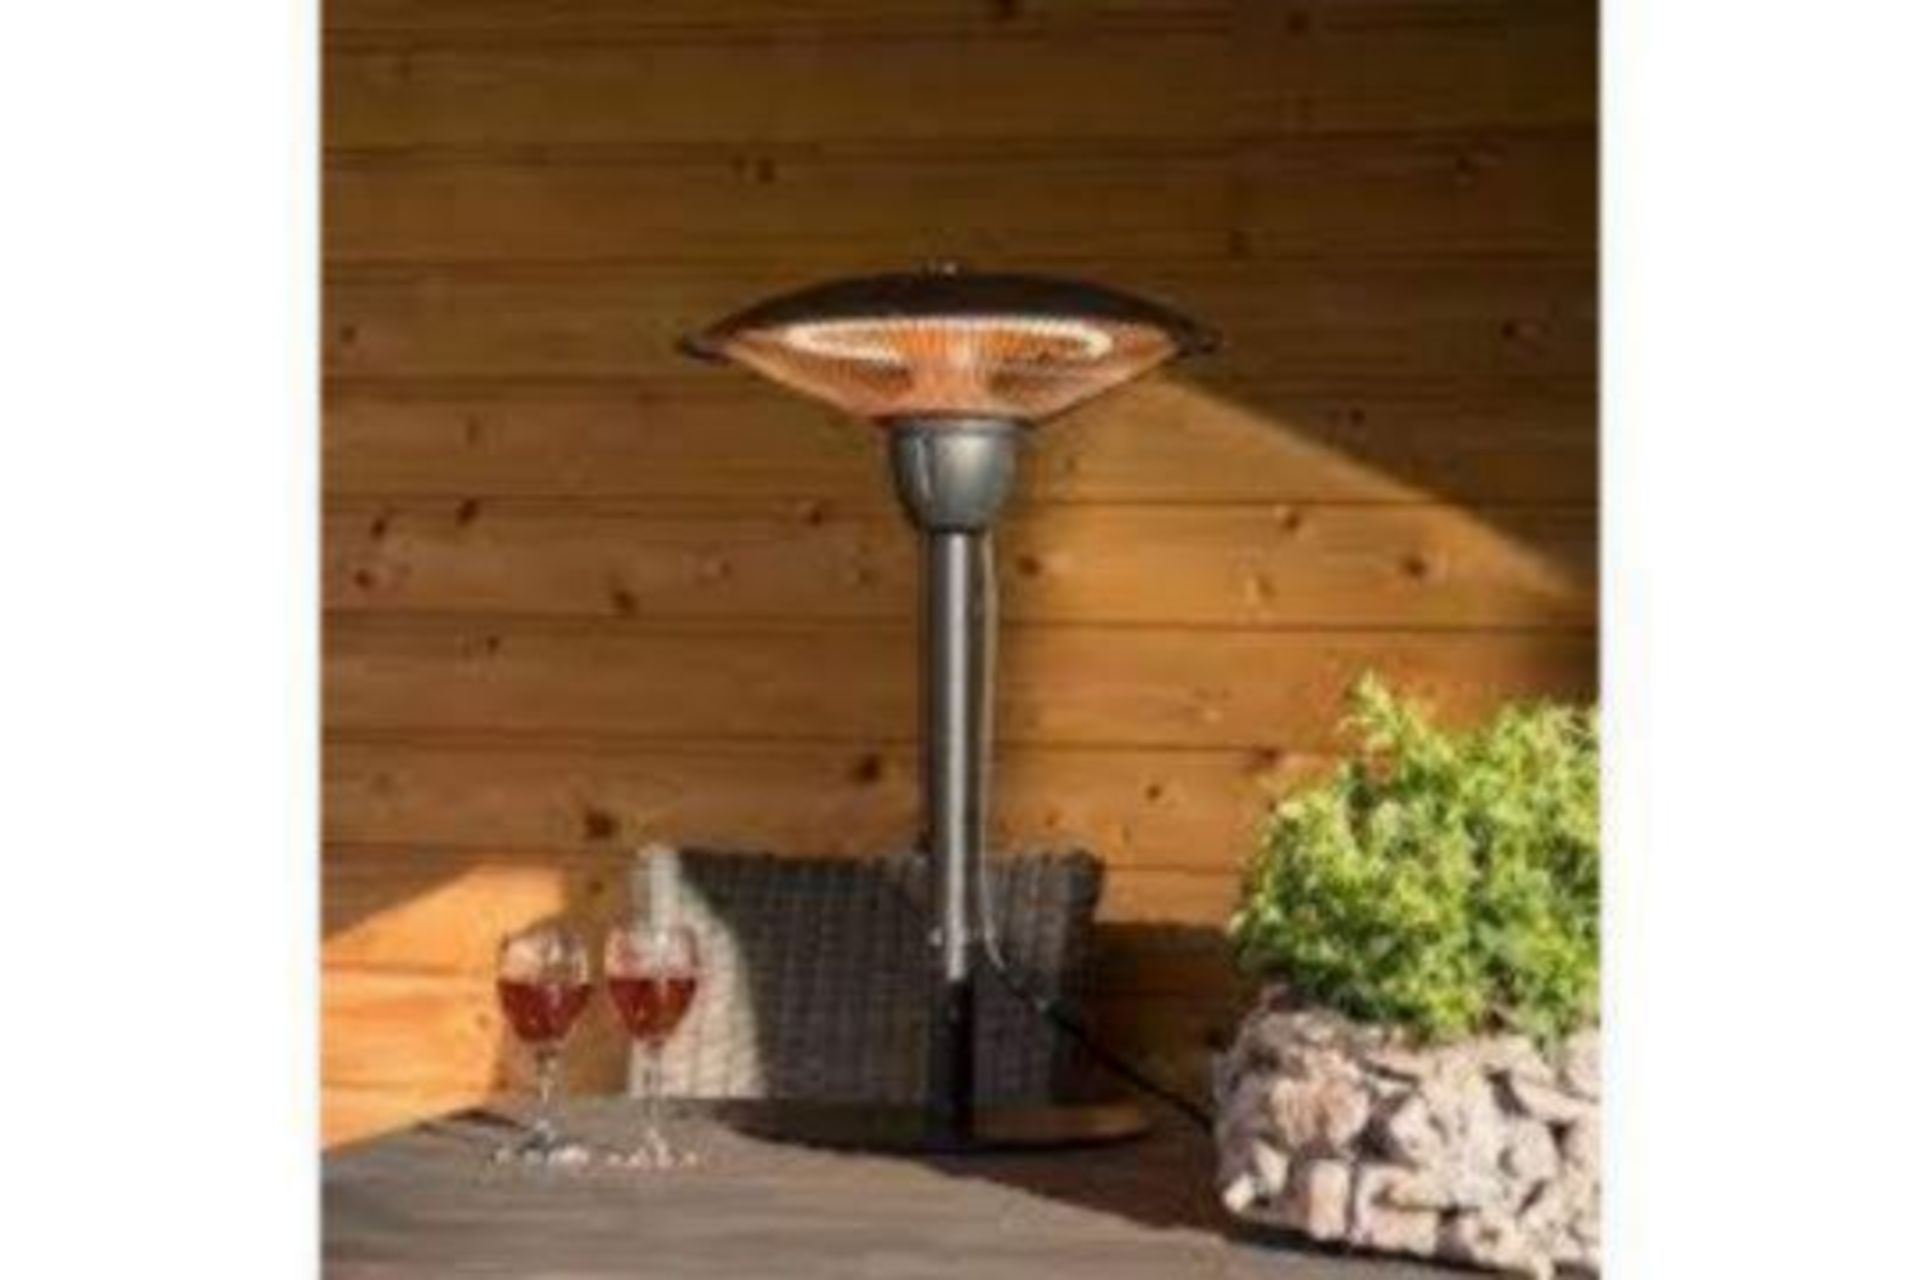 BRAND NEW BARCELONA TABLE HEATER, COMPACT MODEL PERFECT FOR UNDER OR ON THE TABLE, HEATED BODY